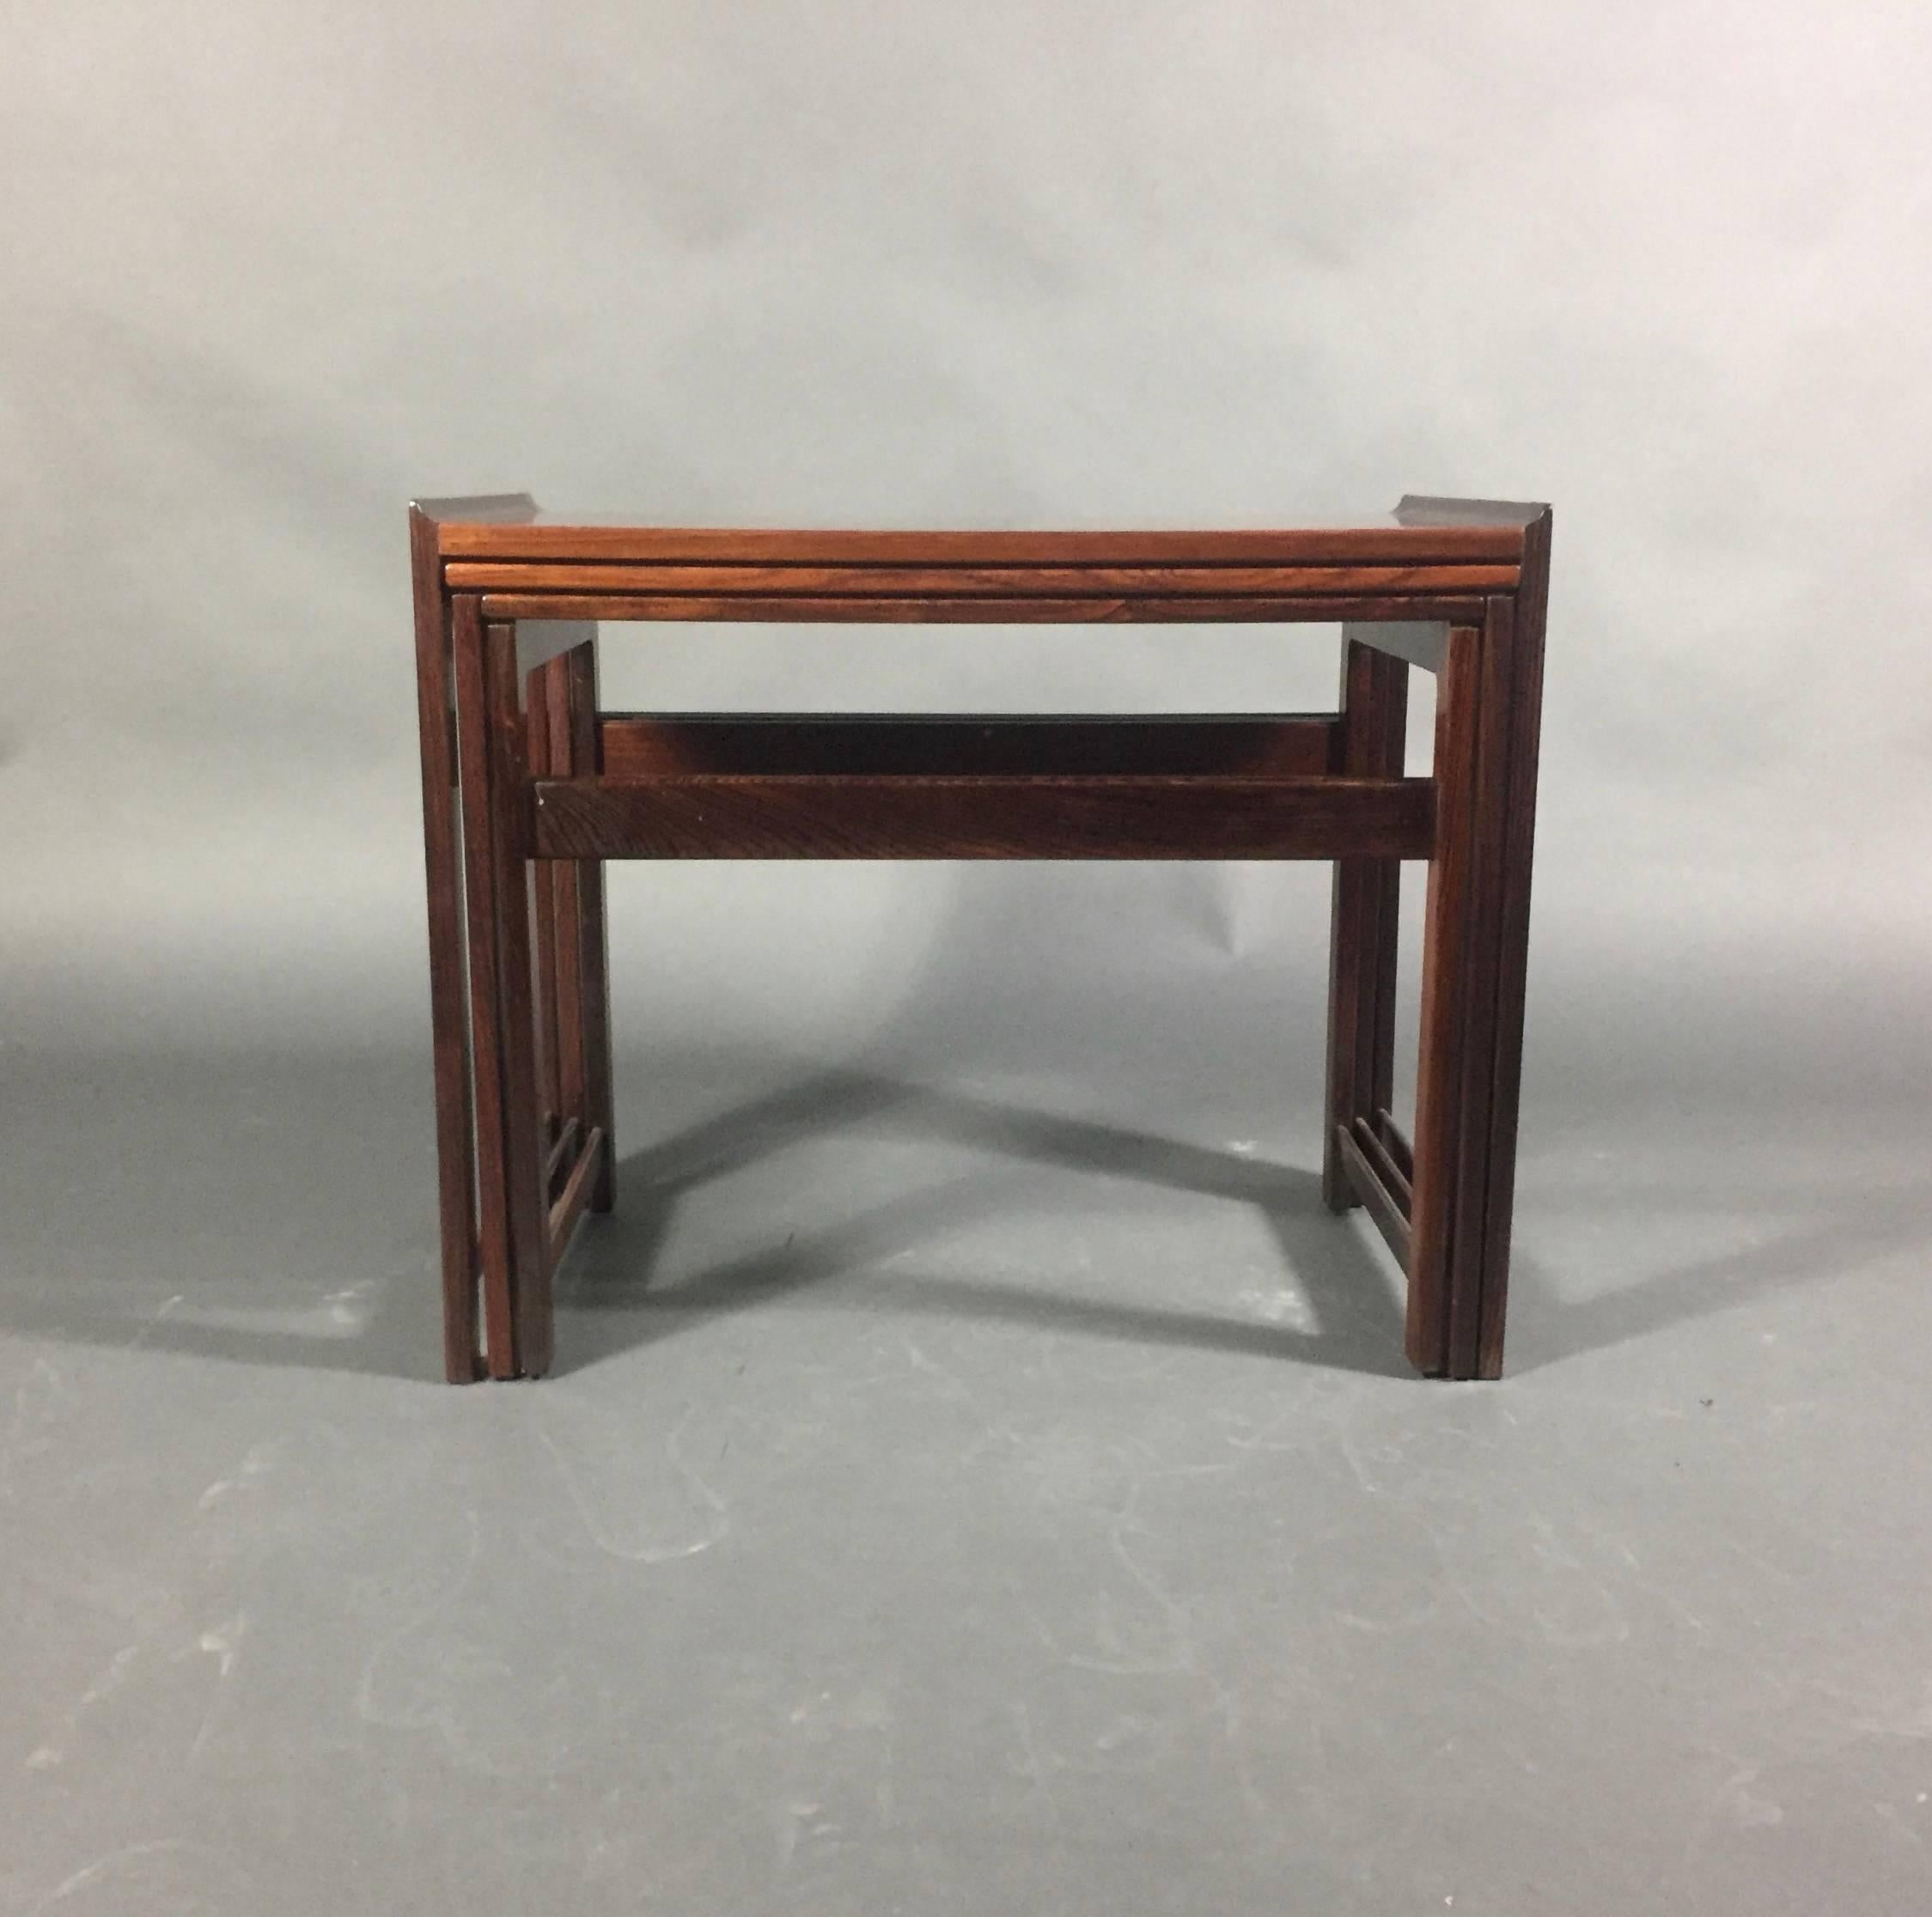 An elegant set of three nesting tables in a classic rosewood with flared ends. Danish design, early 1970s. Refinished condition.